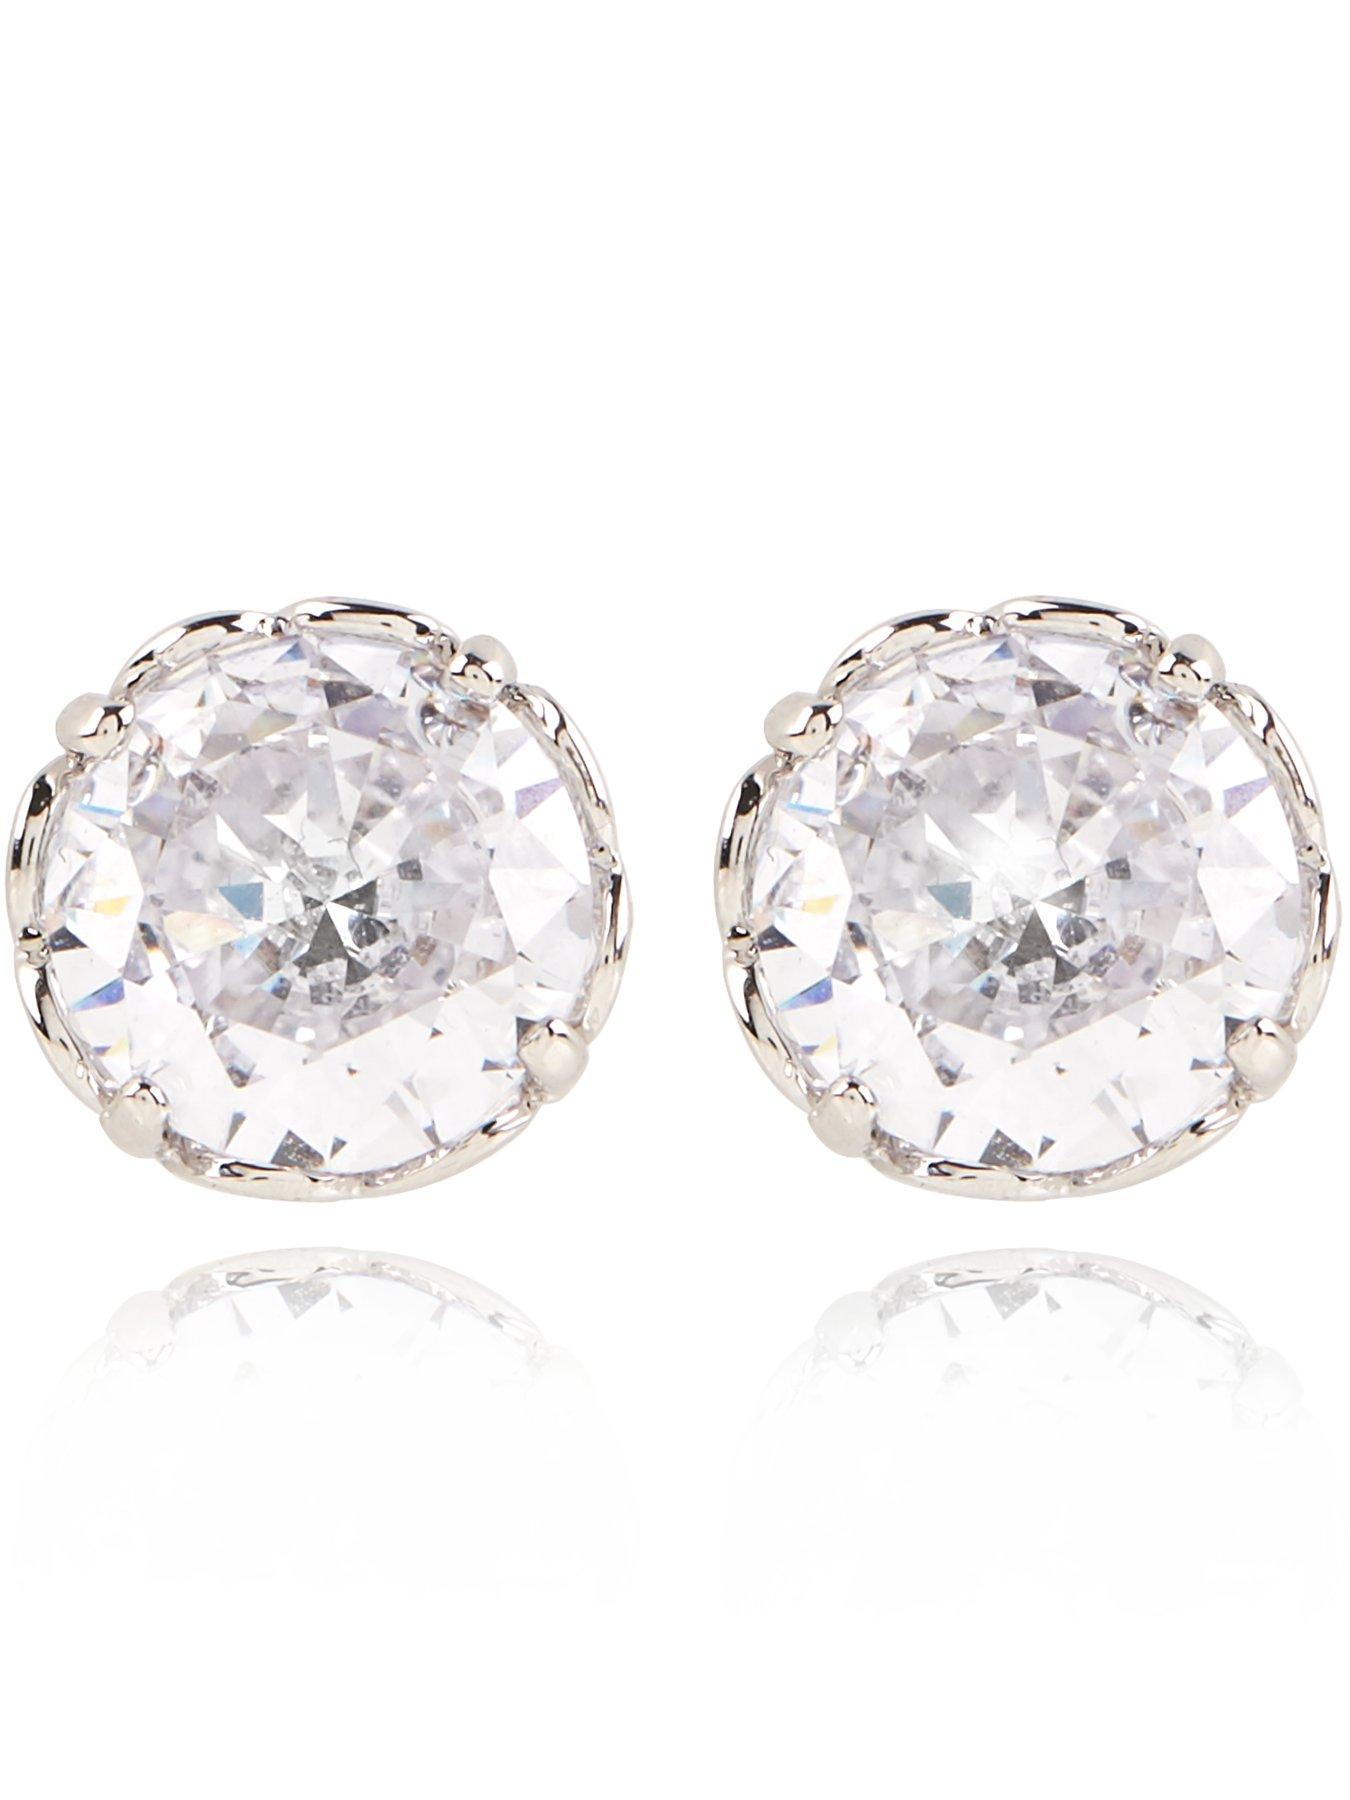 Kate Spade New York That Sparkle Round Stud Earrings - Silver 